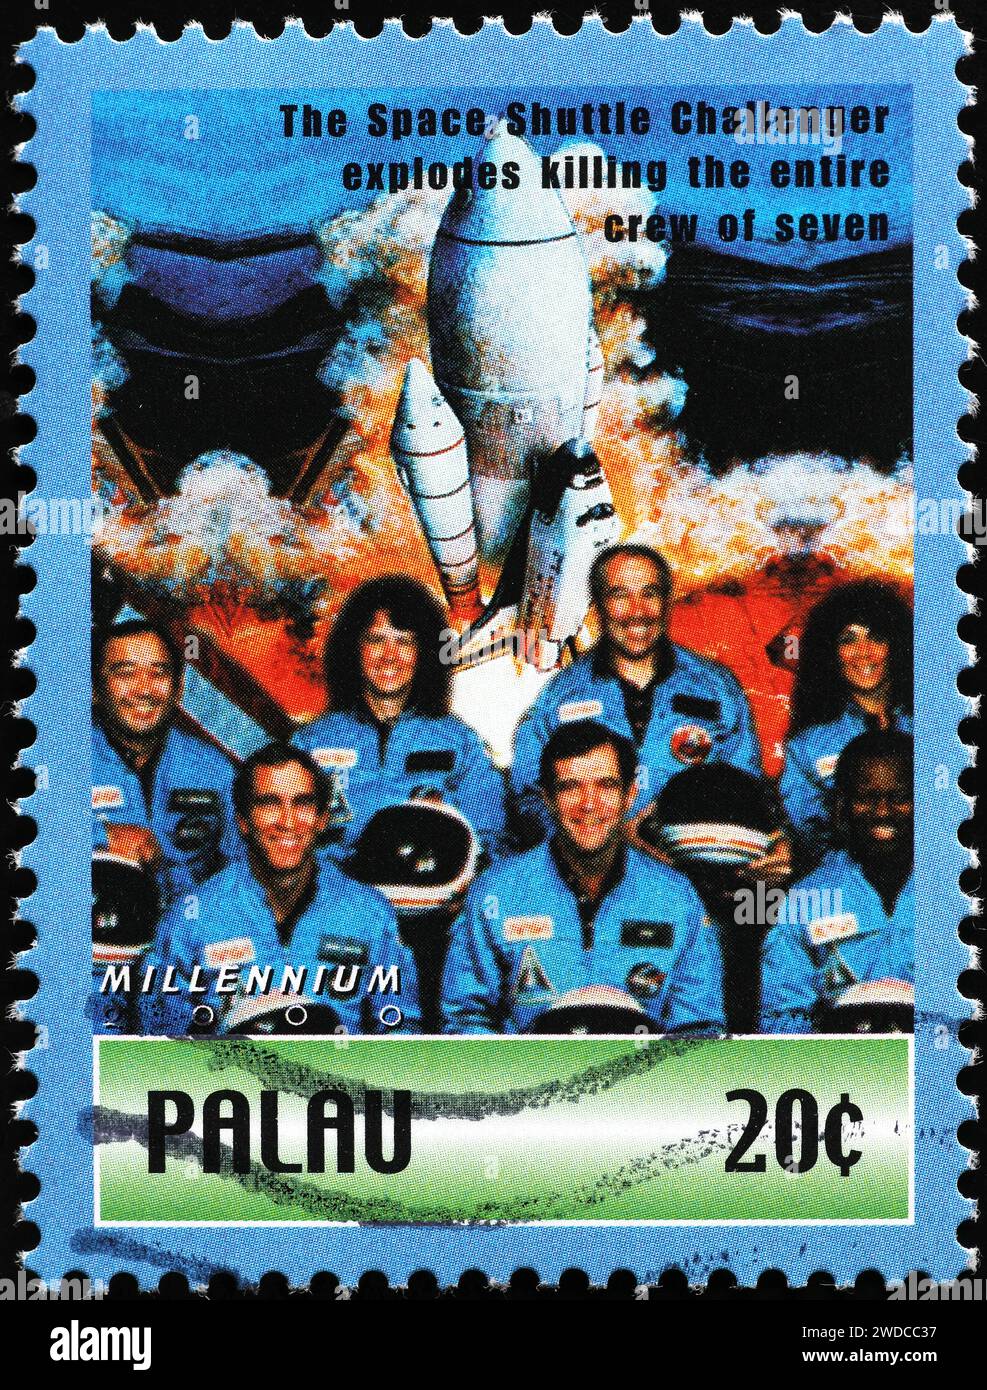 The Space Shuttle Columbia disaster of 1986 remembered on stamp Stock Photo